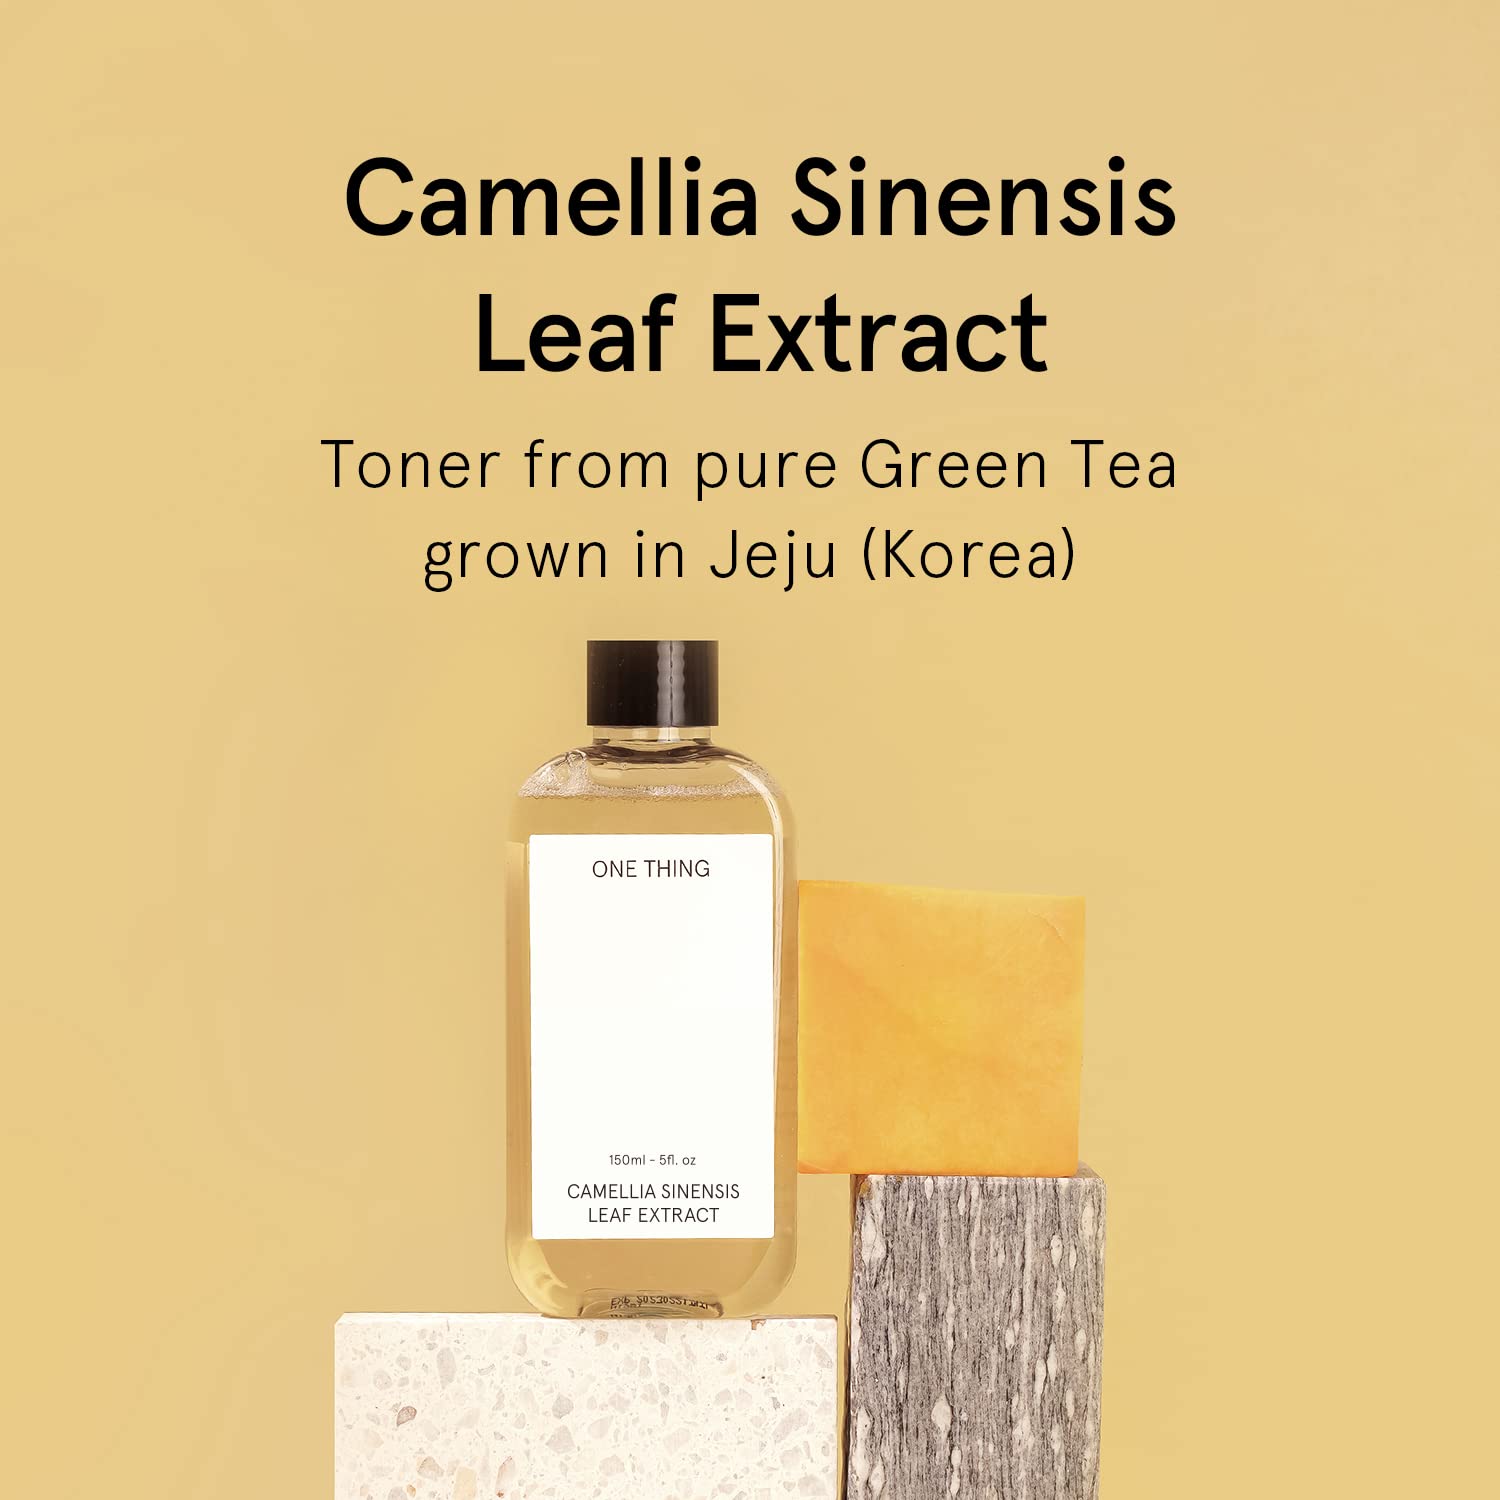 ONE THING Camellia Sinensis Leaf Extract 300ml